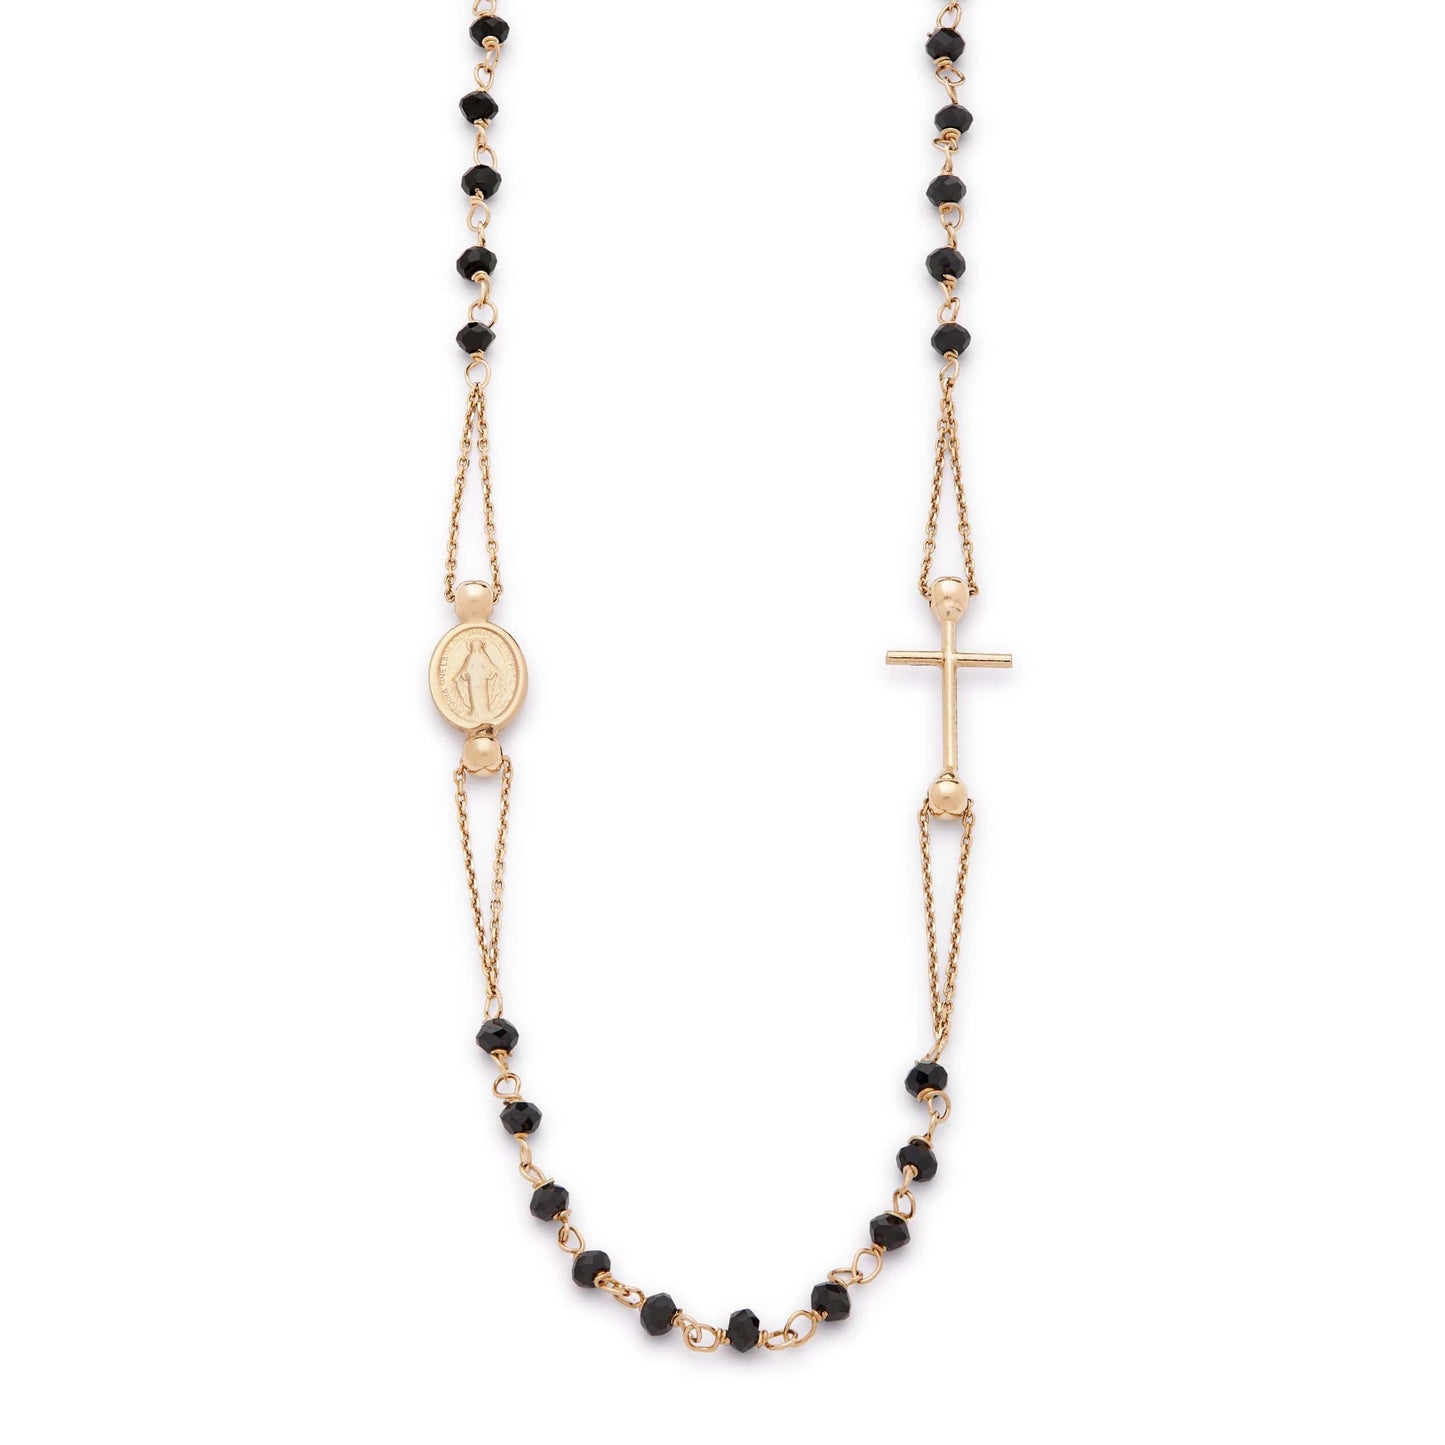 MONDO CATTOLICO Prayer Beads 24.5 cm (9.64 in) / 3 mm (0.11 in) Black Crystals Rosary Beads Necklace